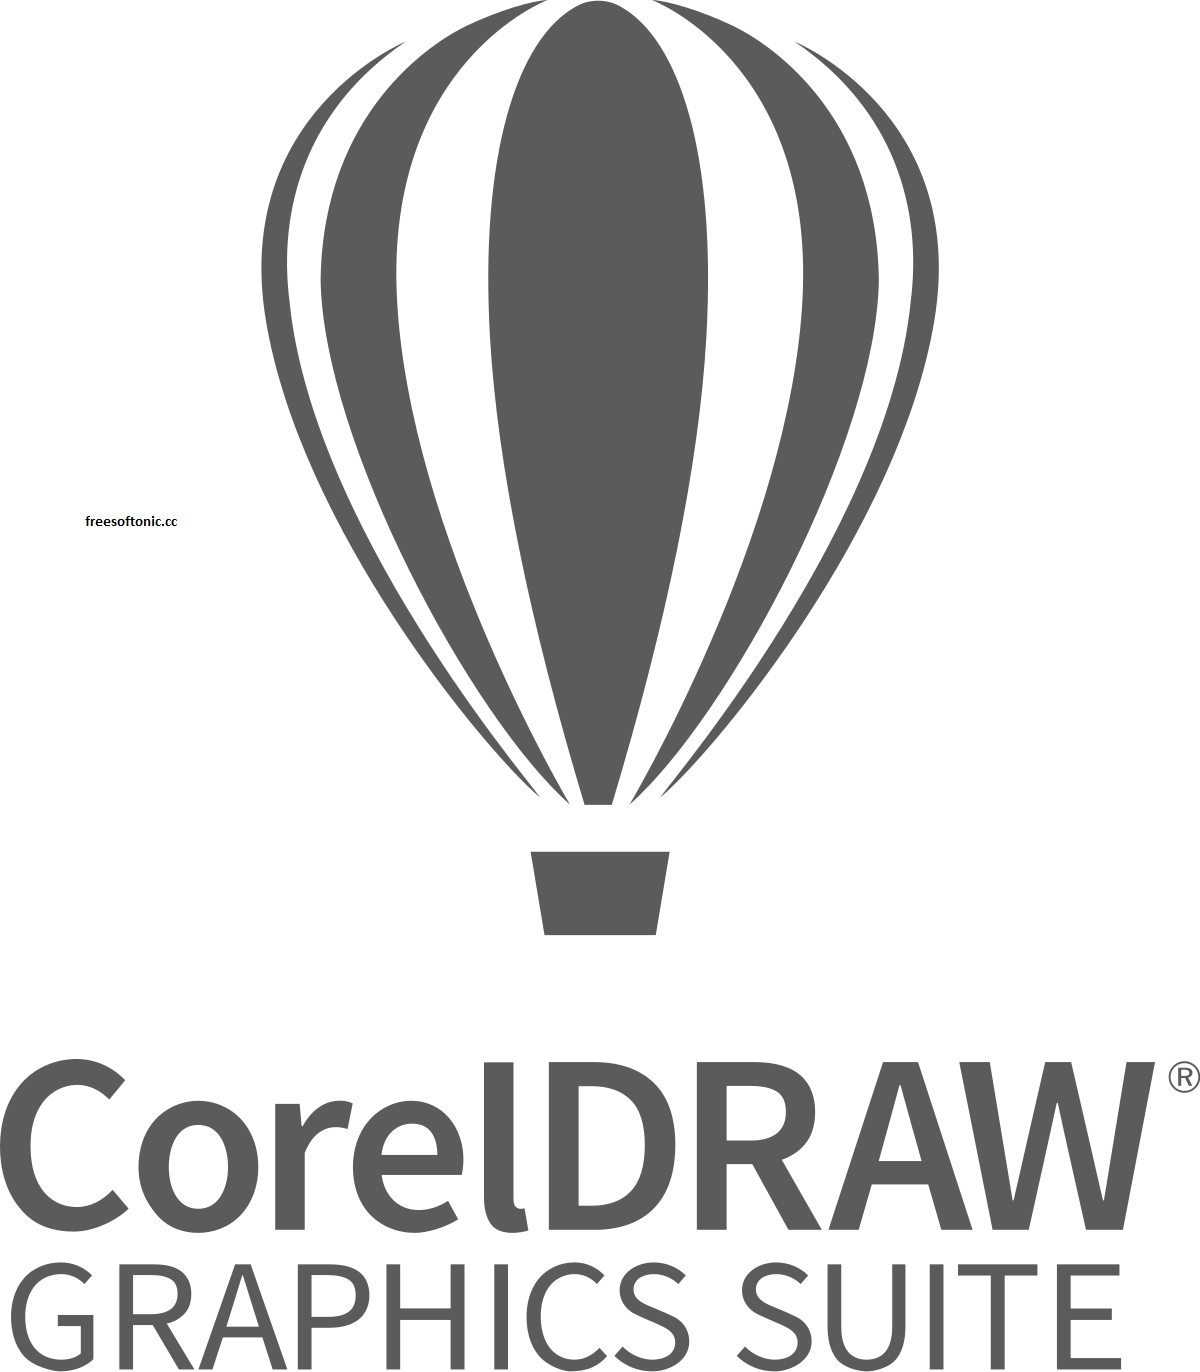 coreldraw free download full version with crack